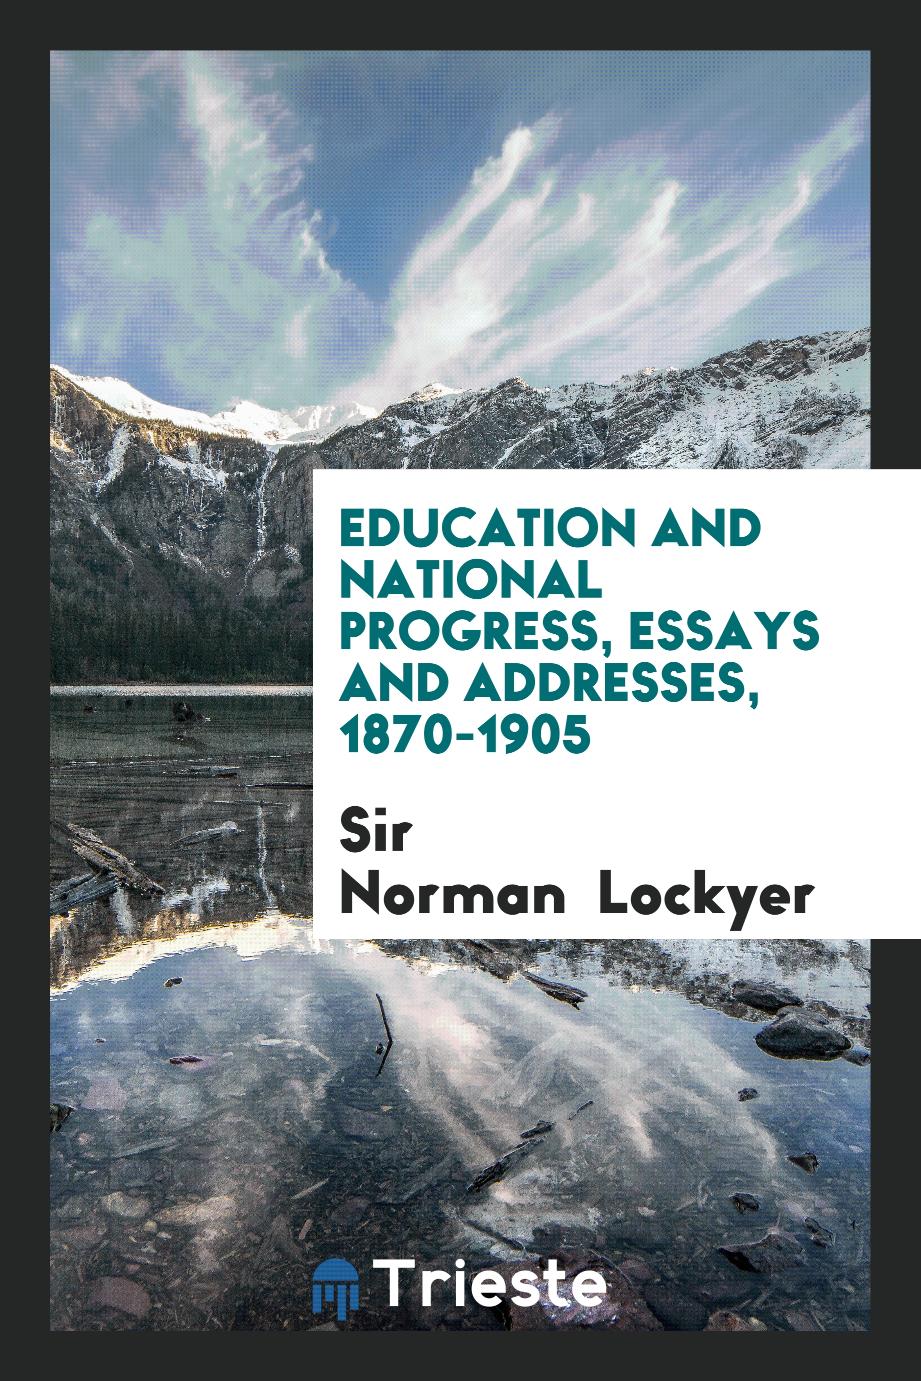 Education and National Progress, Essays and Addresses, 1870-1905